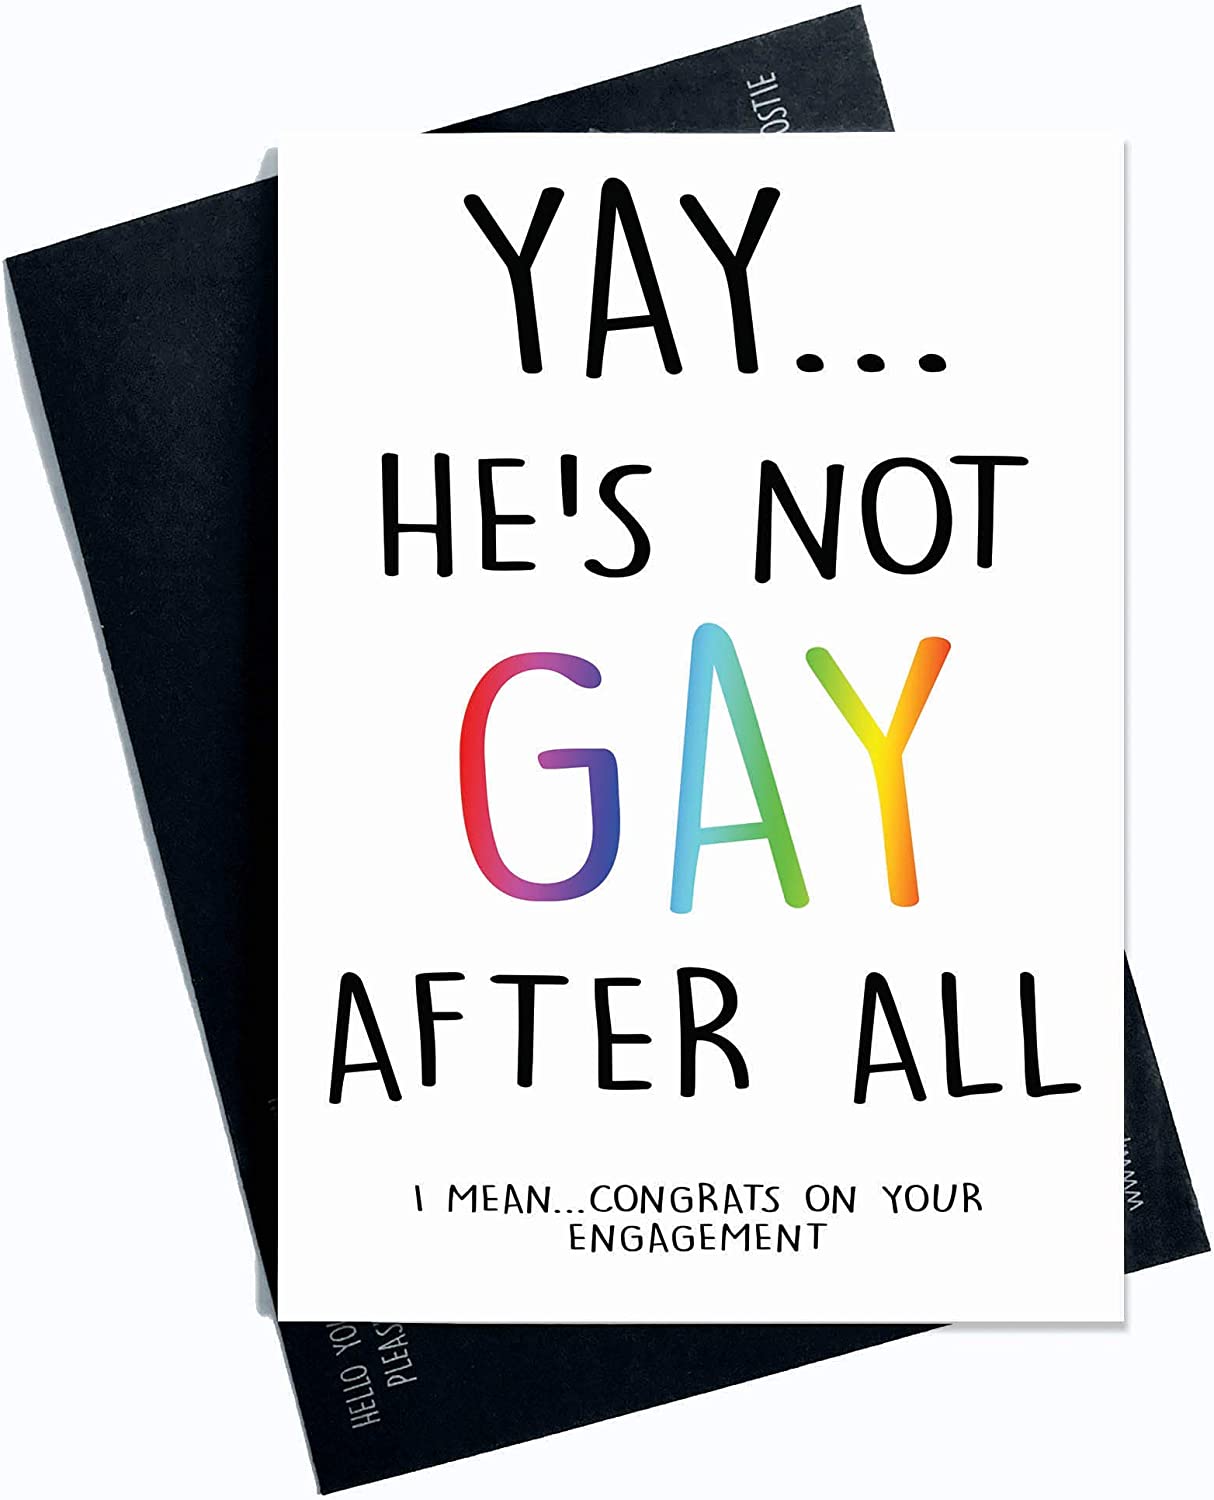 Peachy Antics ''Yay He's Not Gay After All'' Engagement Card RRP 2 CLEARANCE XL 1.50